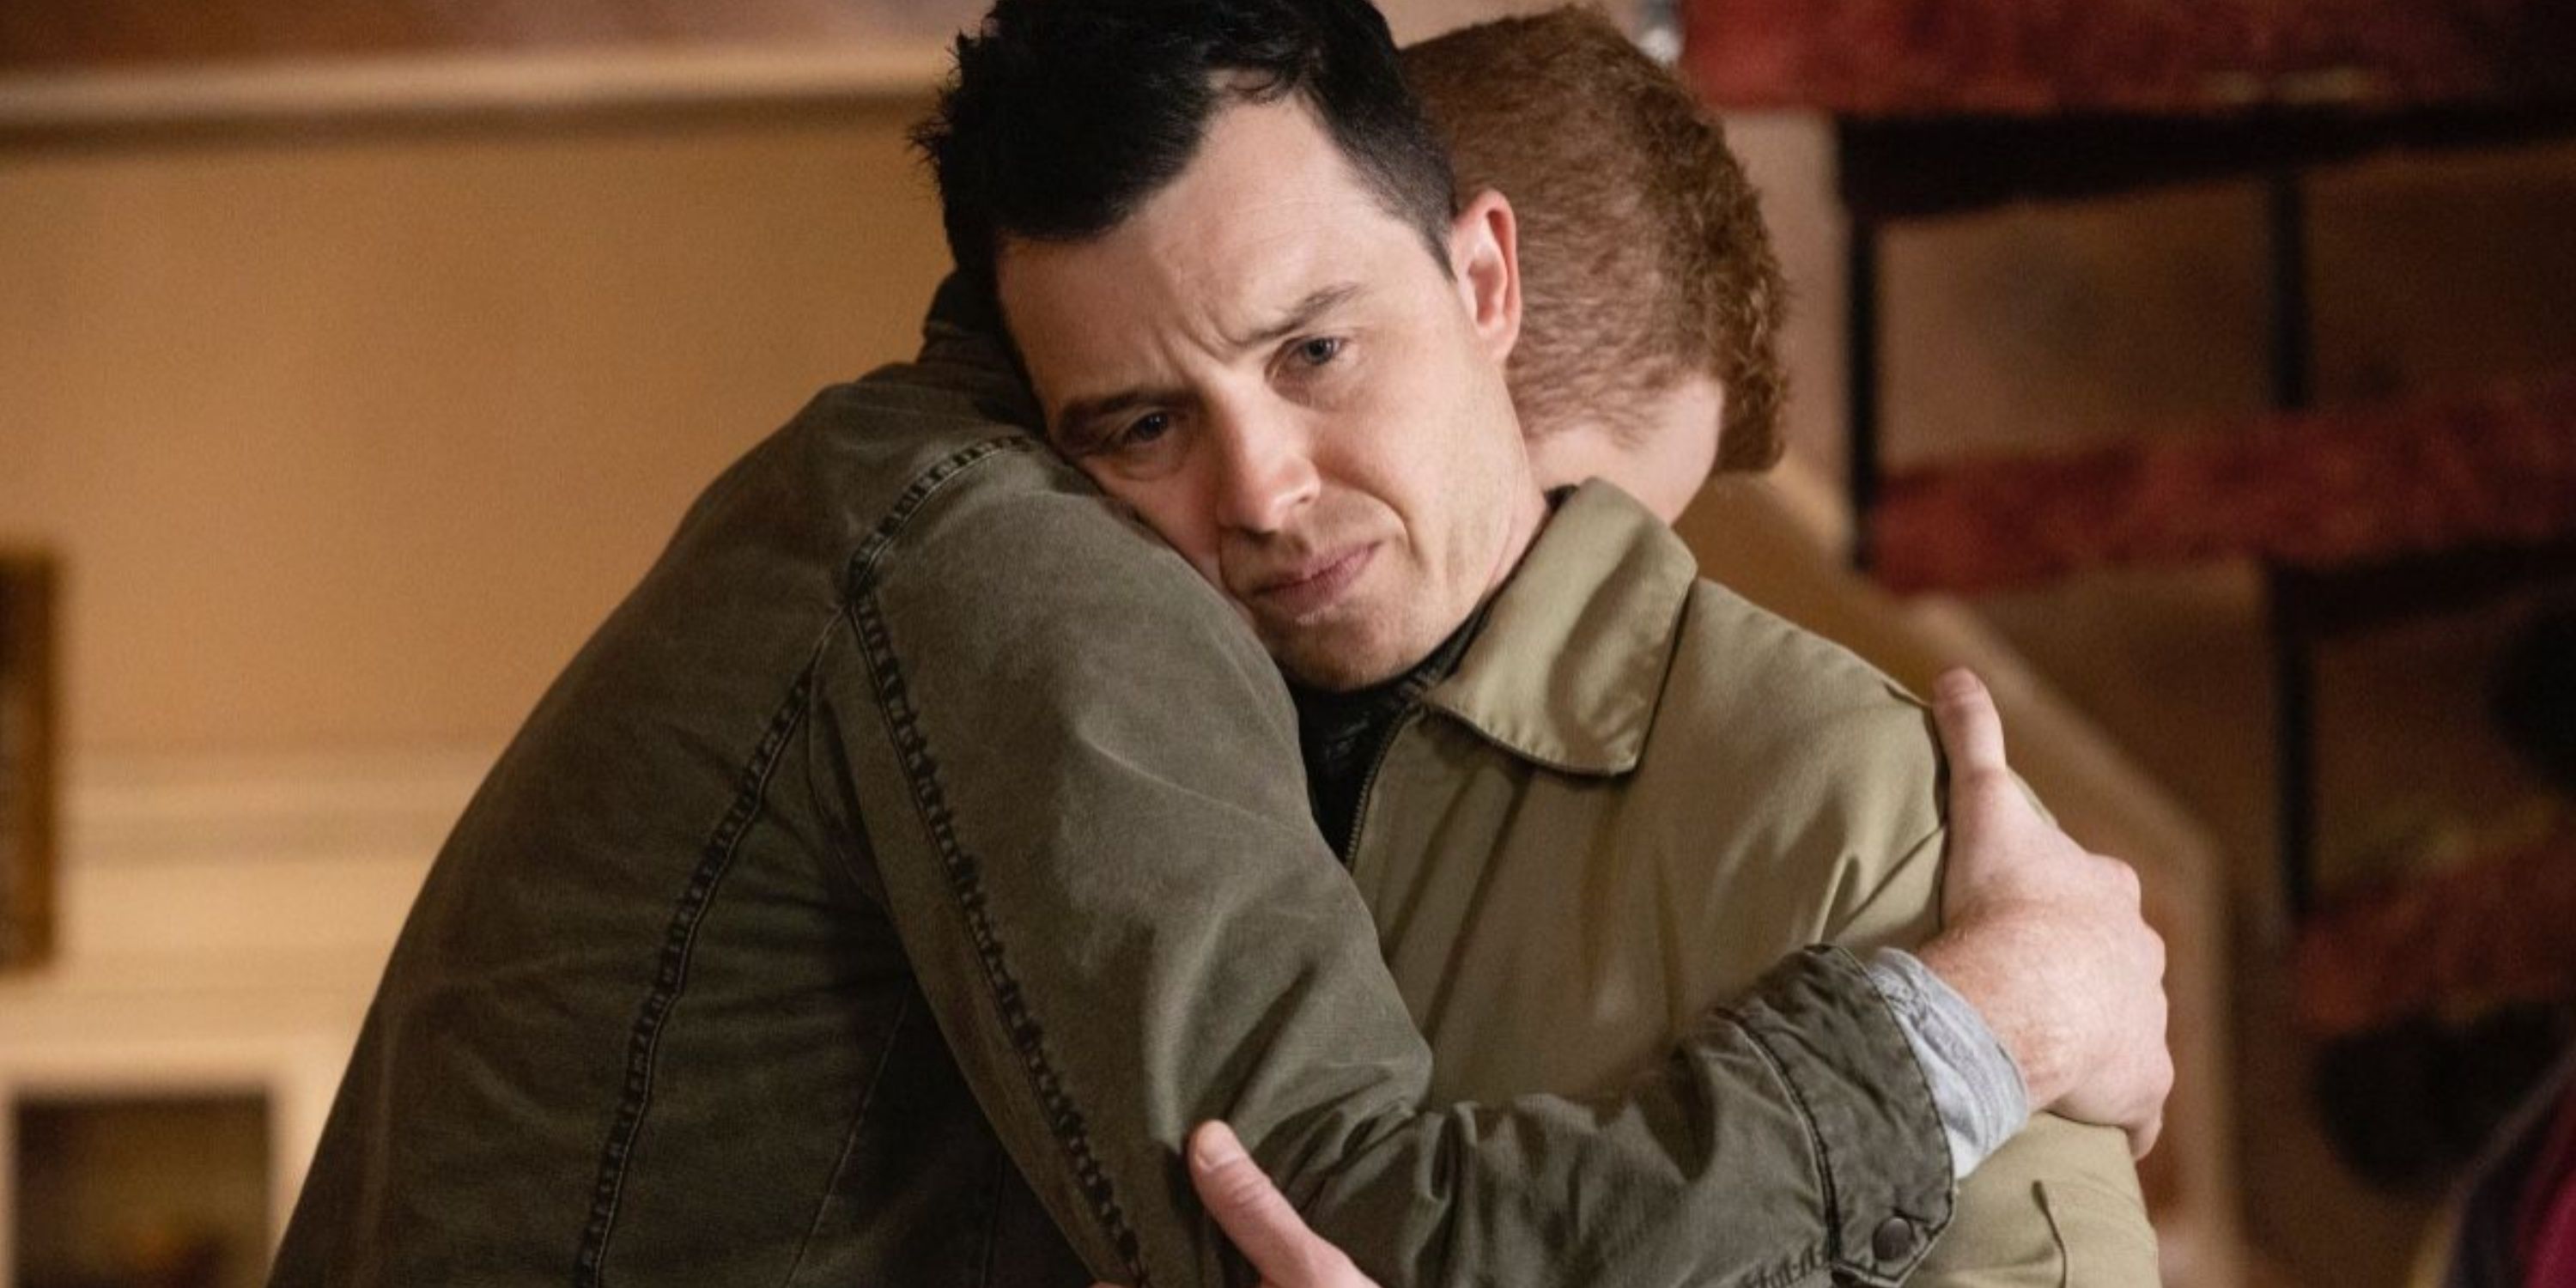 Cameron Monaghan as Ian Gallagher and Noel Fisher as Mickey Milkovich